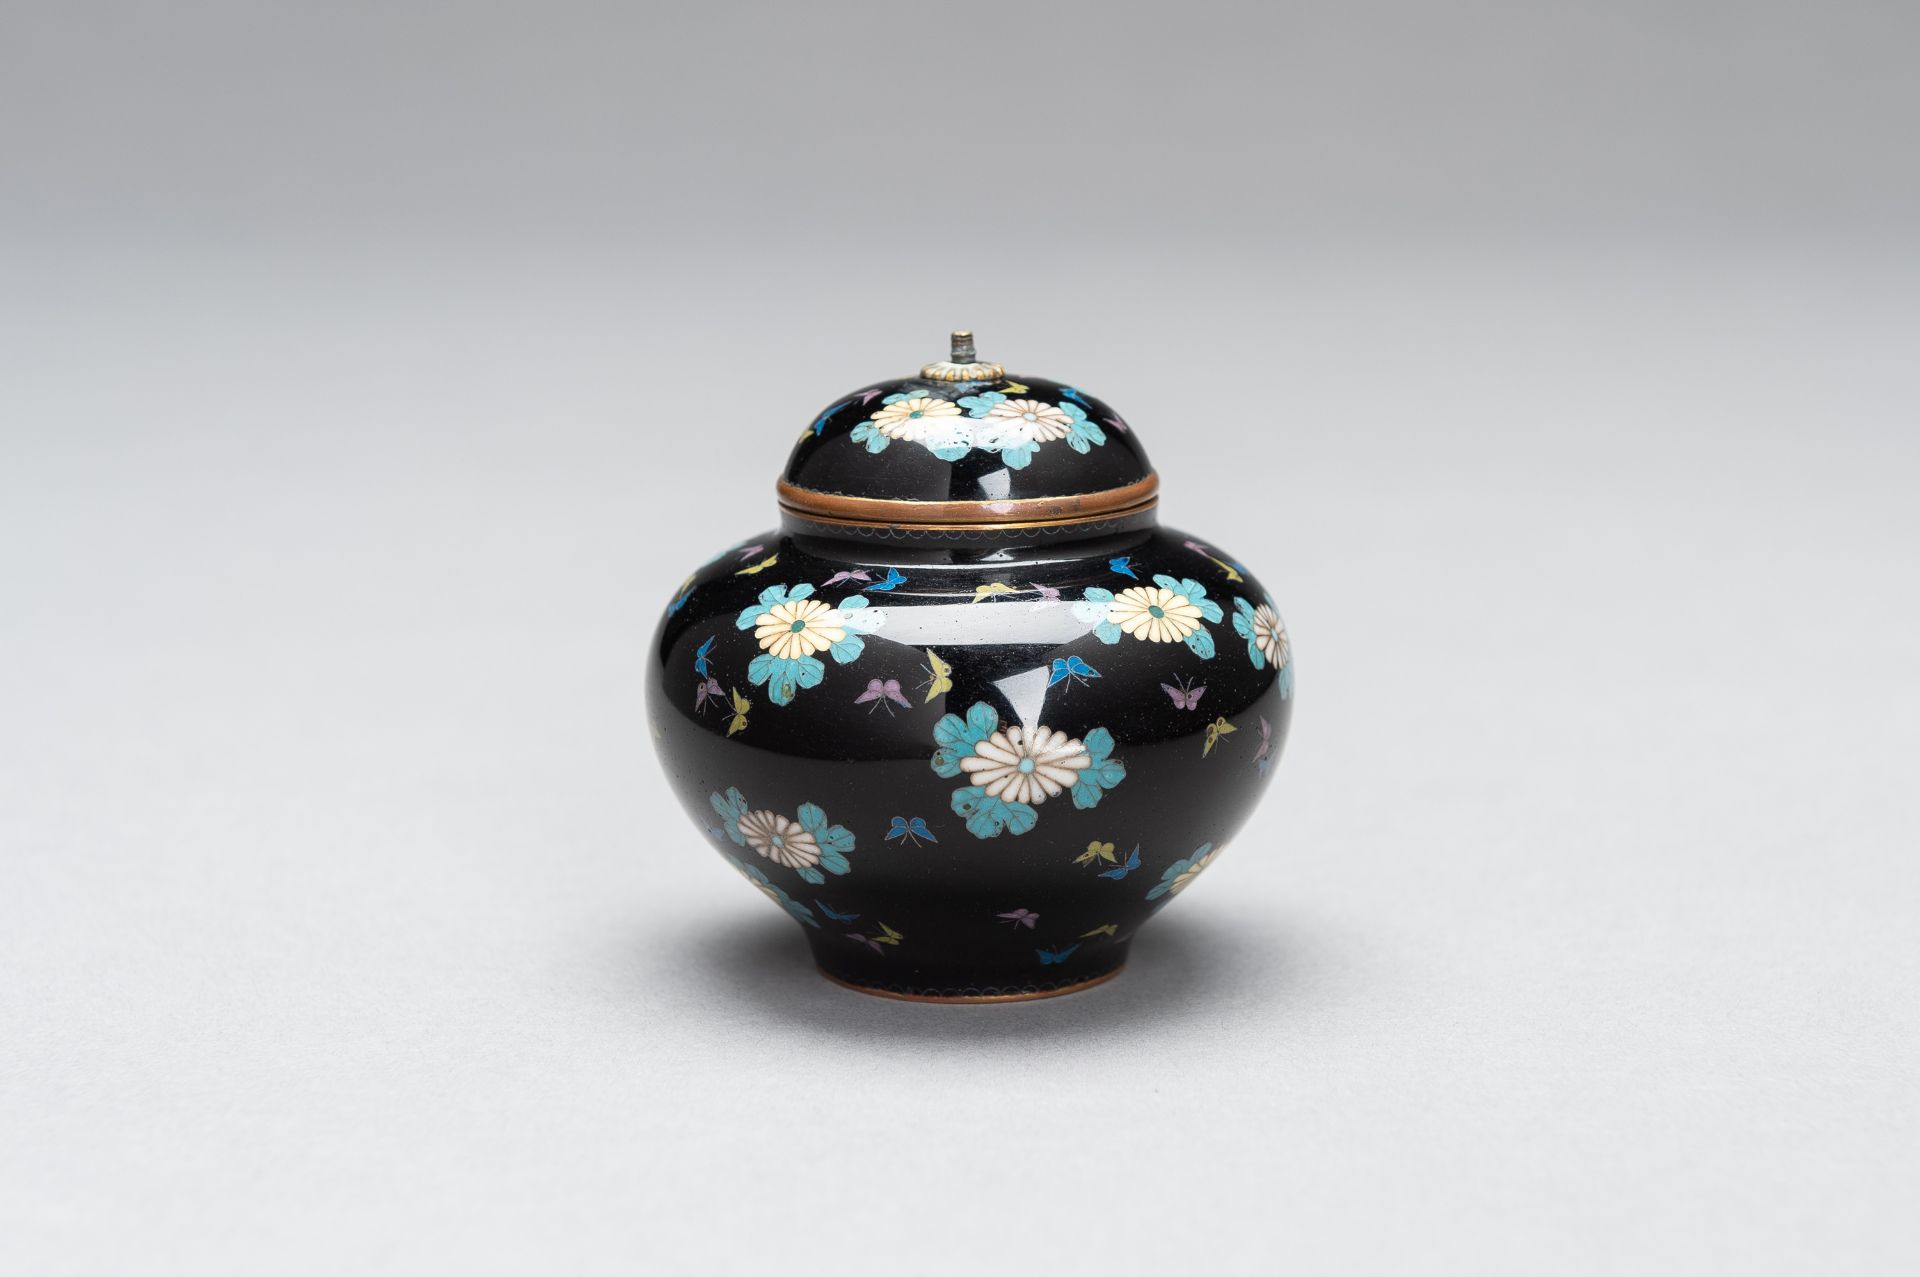 A CLOISONNE ENAMEL MINIATURE VASE WITH COVER - Image 5 of 9